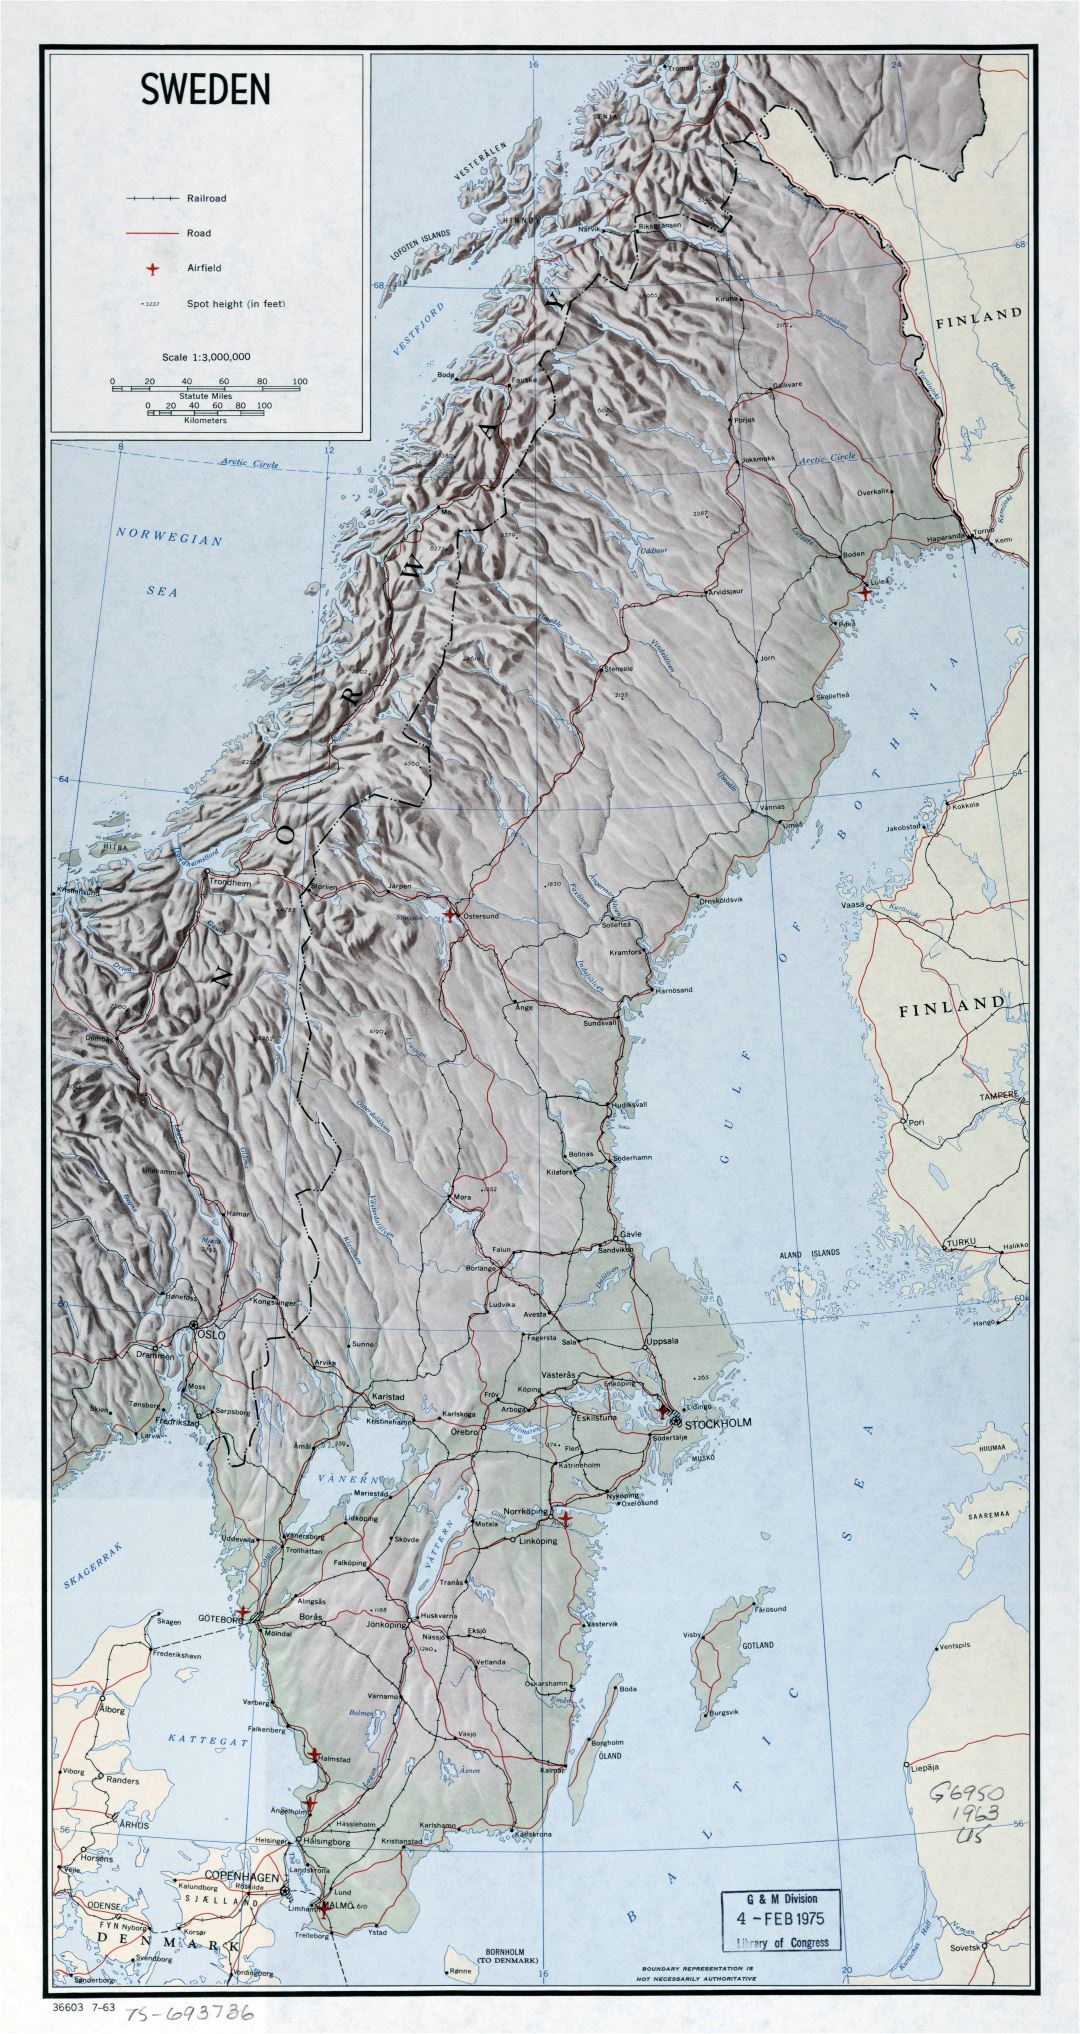 Large scale political map of Sweden with relief, roads, railroads, major cities and airports - 1963